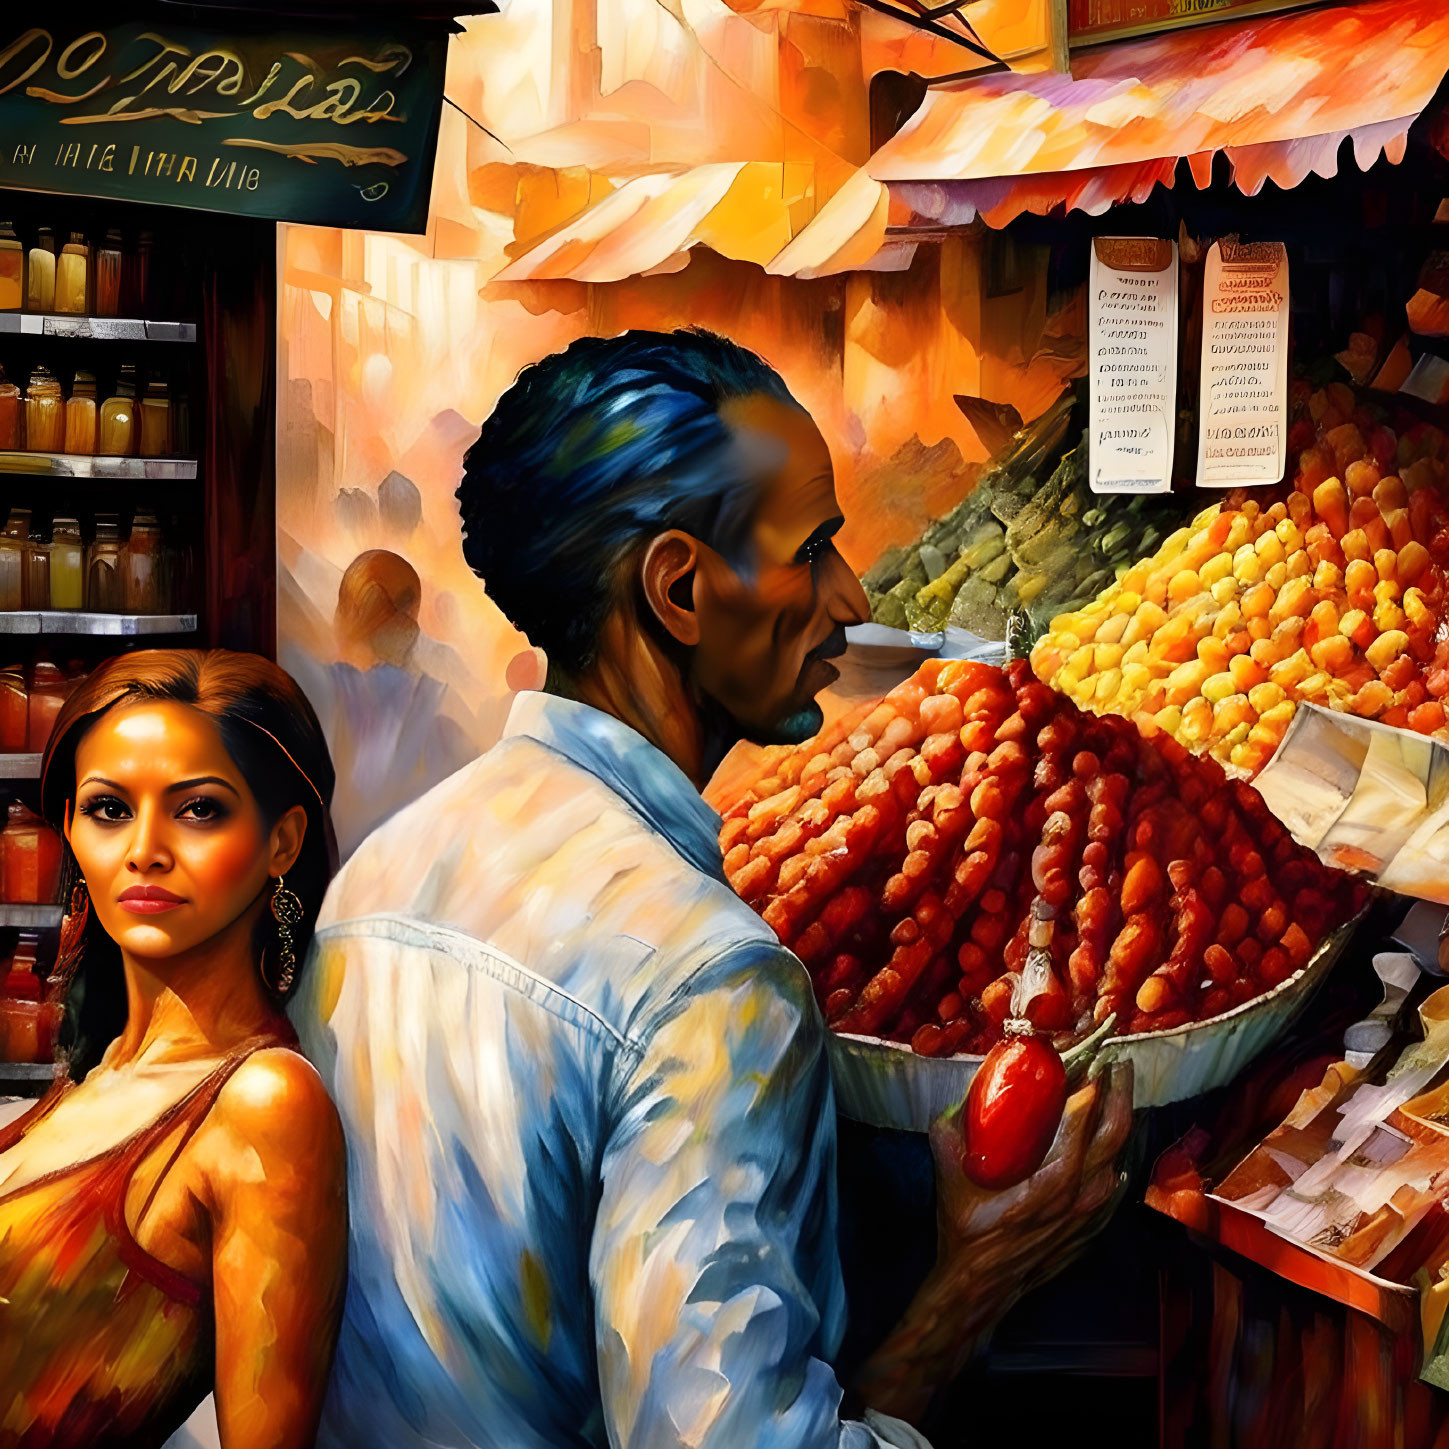 Vibrant digital artwork: man in blue shirt with post-impressionistic features and woman by fruit